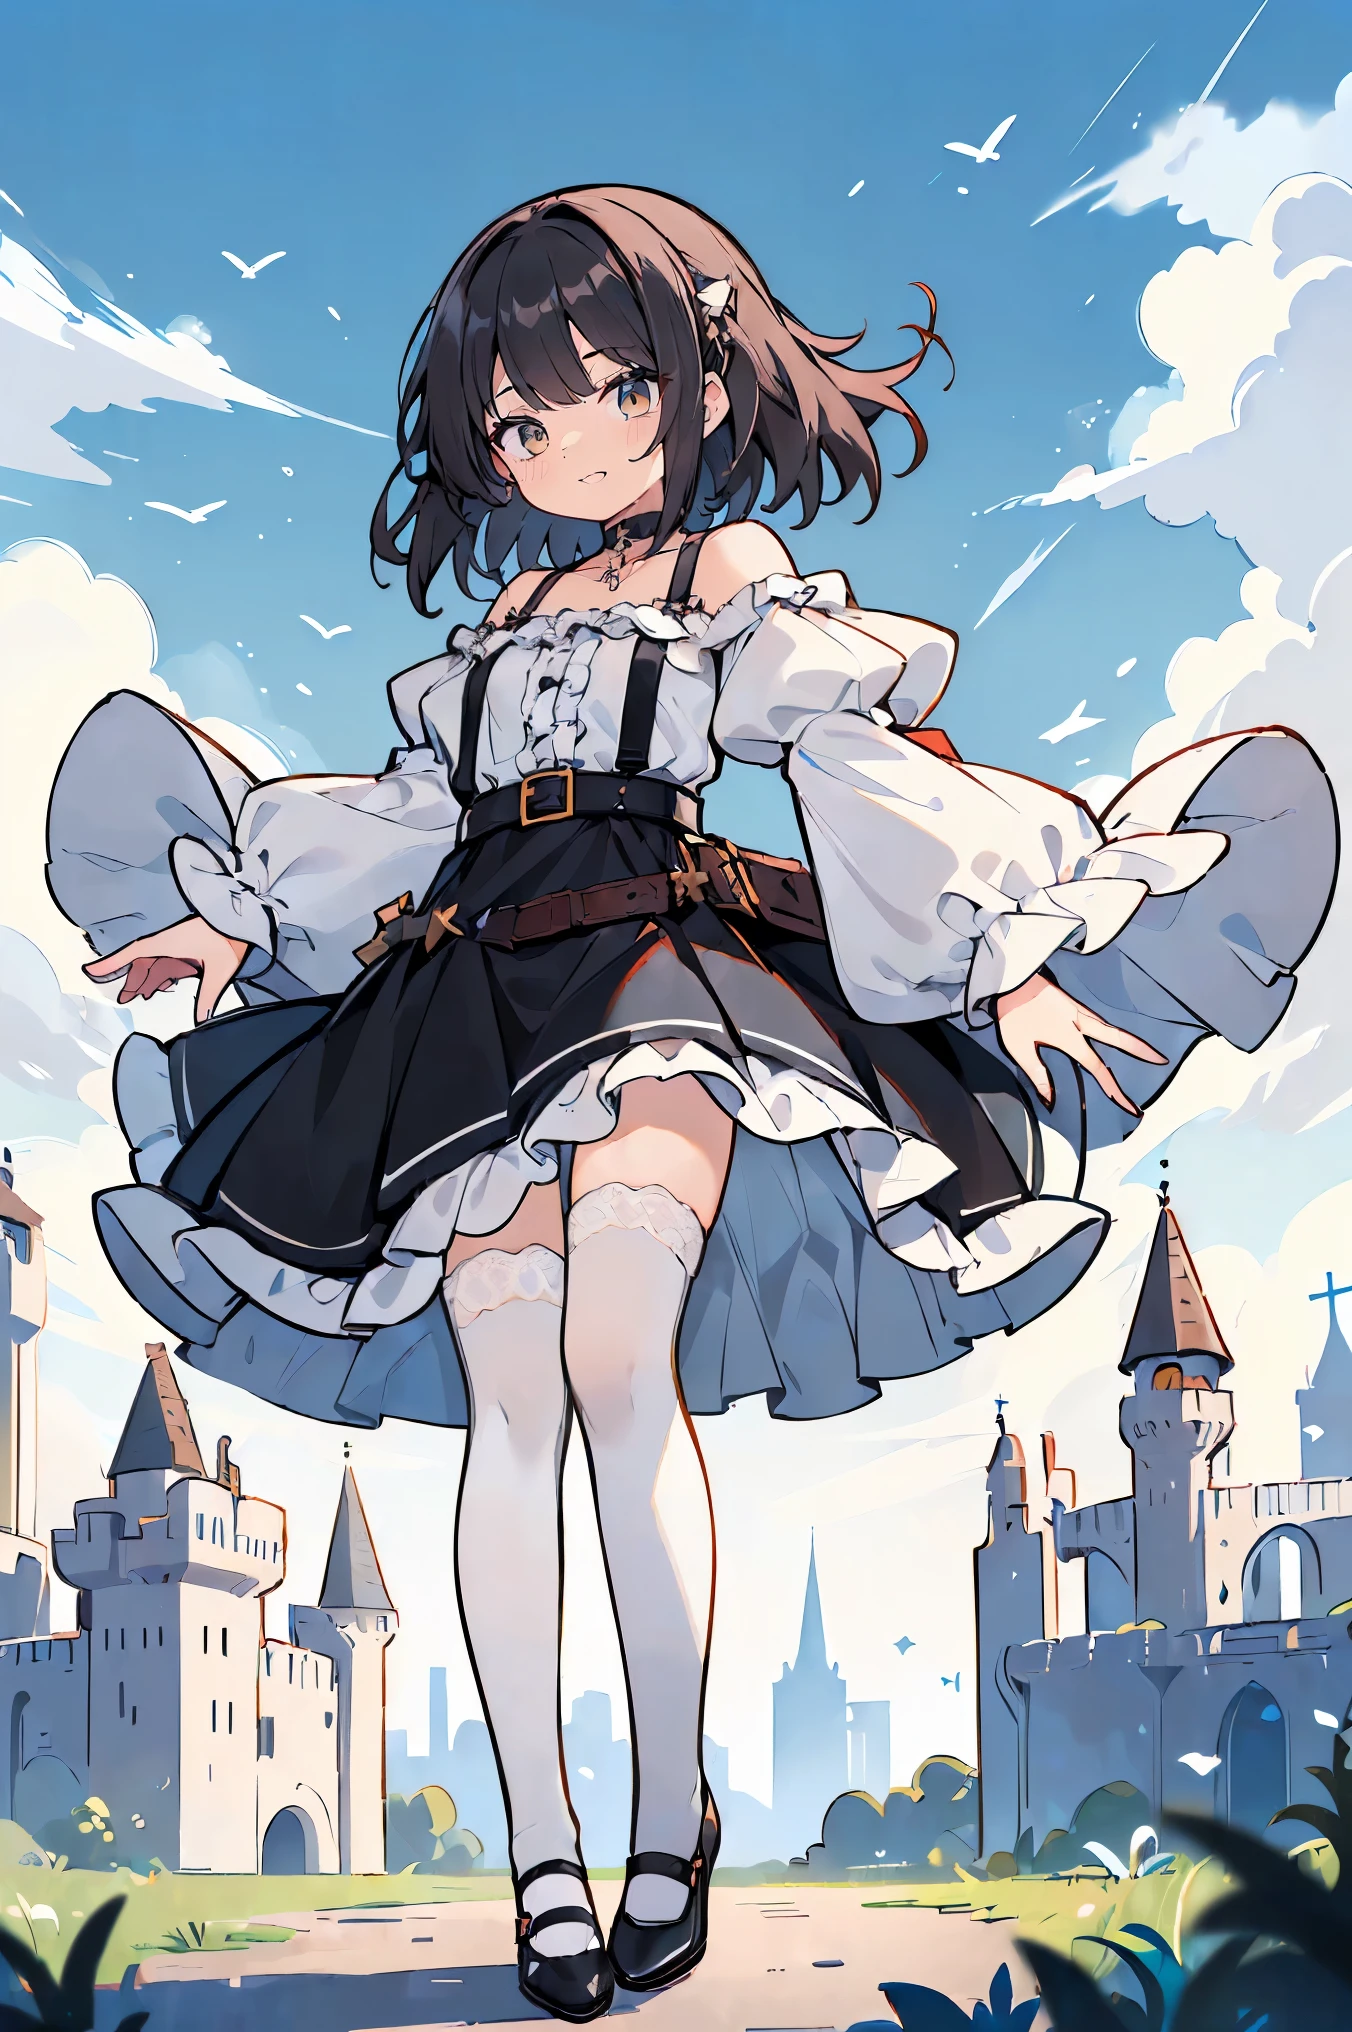 1 girl, solo, full body, standing, background with((fantasy world, ruins, fort, beautiful sky, shining sky, sunshine, castle:1.55)), girl with(((medium hair, long hair, one side up:1.55), (perfect hands, five fingers:1.55), (camisoles, suspenders, belt, blue clothes, cross, choker, collarbone, dress, wind blowing dress, lace dress, frills camisoles, off-shoulder sleeves, half-sleeves, black pumps, black footwear:1.55), ((white legwear, single legwear:1.55)))